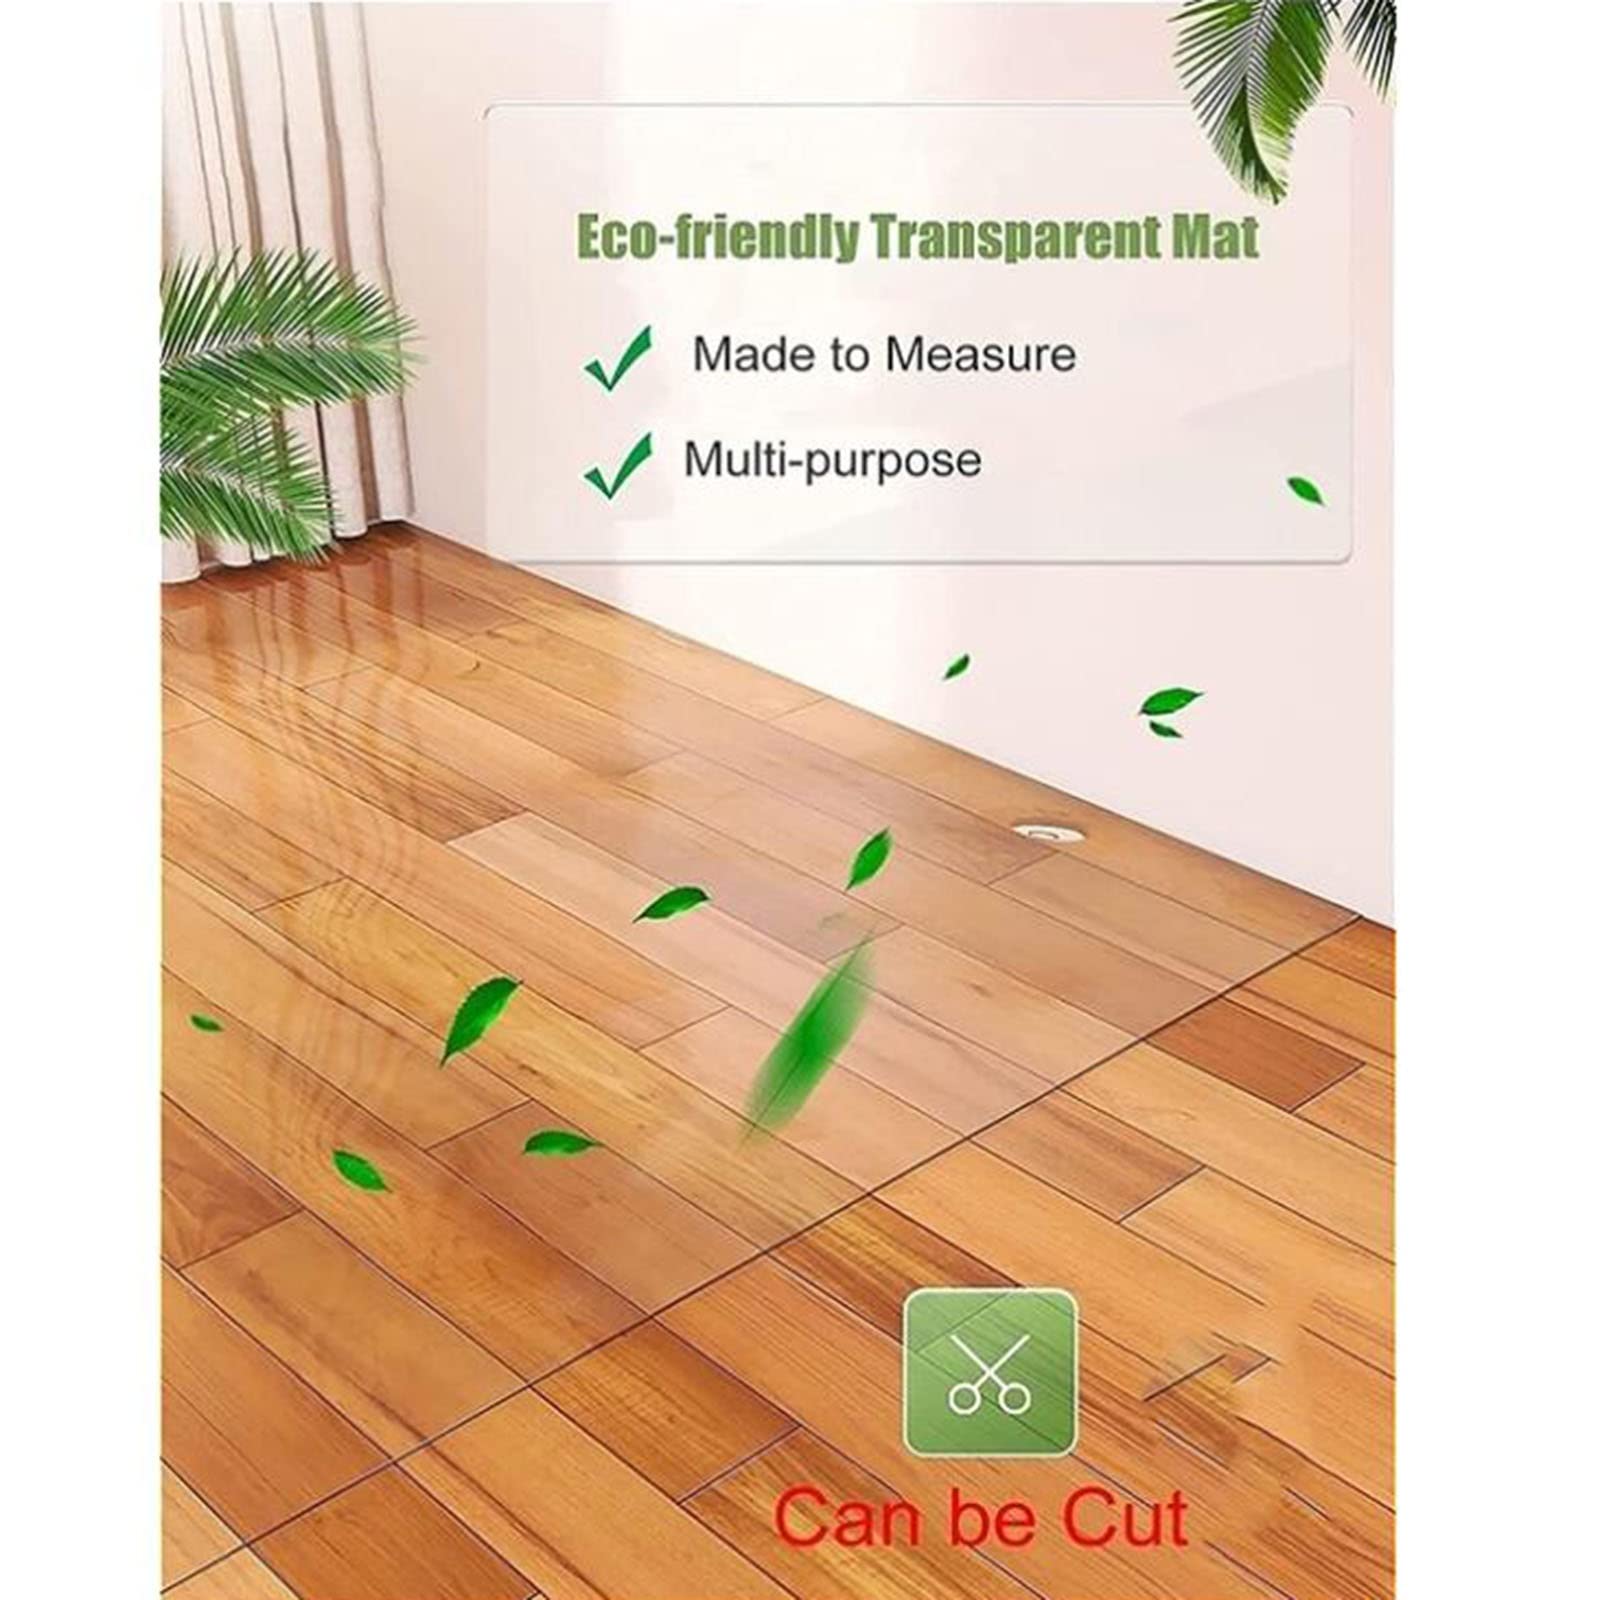 Clear PVC Desk Chair Mat PVC Carpet Protector for Hardwood Floors,100% Waterproof Vinyl Plastic Floor Mat,Can Be Cut for Hardwood Floor, Can Be Cut,75/95/115/135/155/165cm Wide for Office & Home (Col